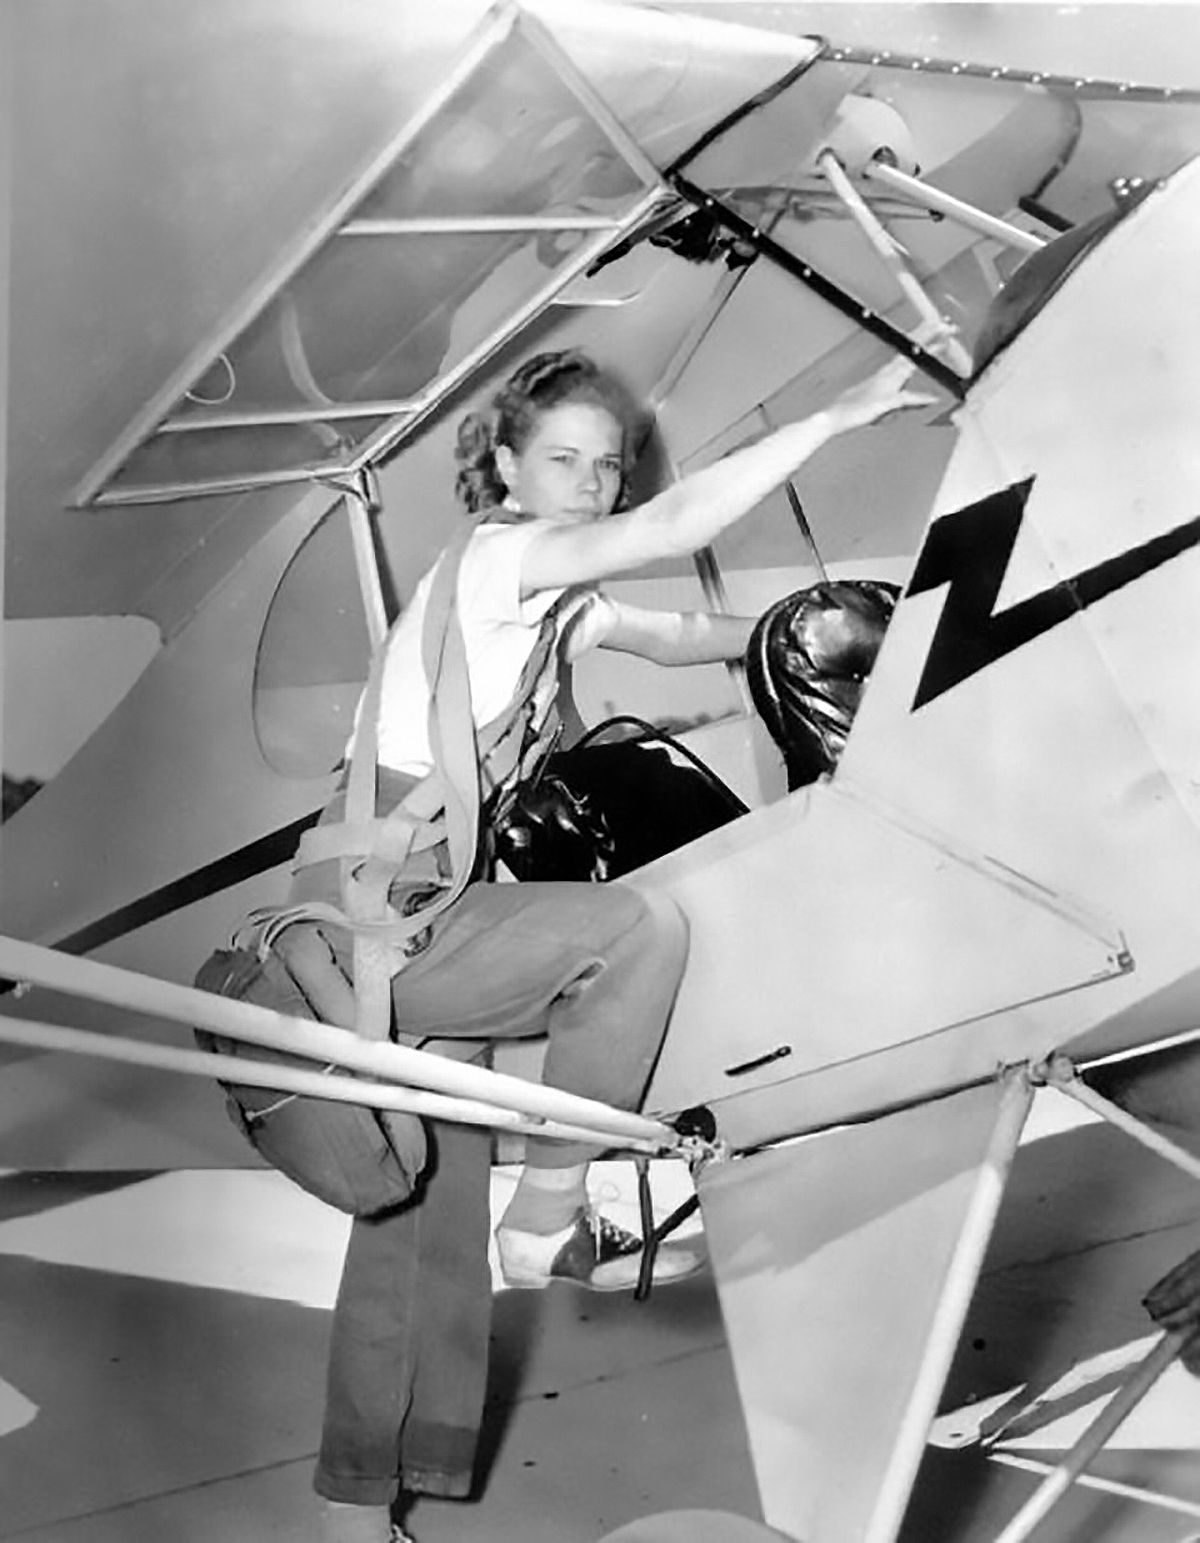 1950s young woman in saddle shoes stepping into a piper cub plane